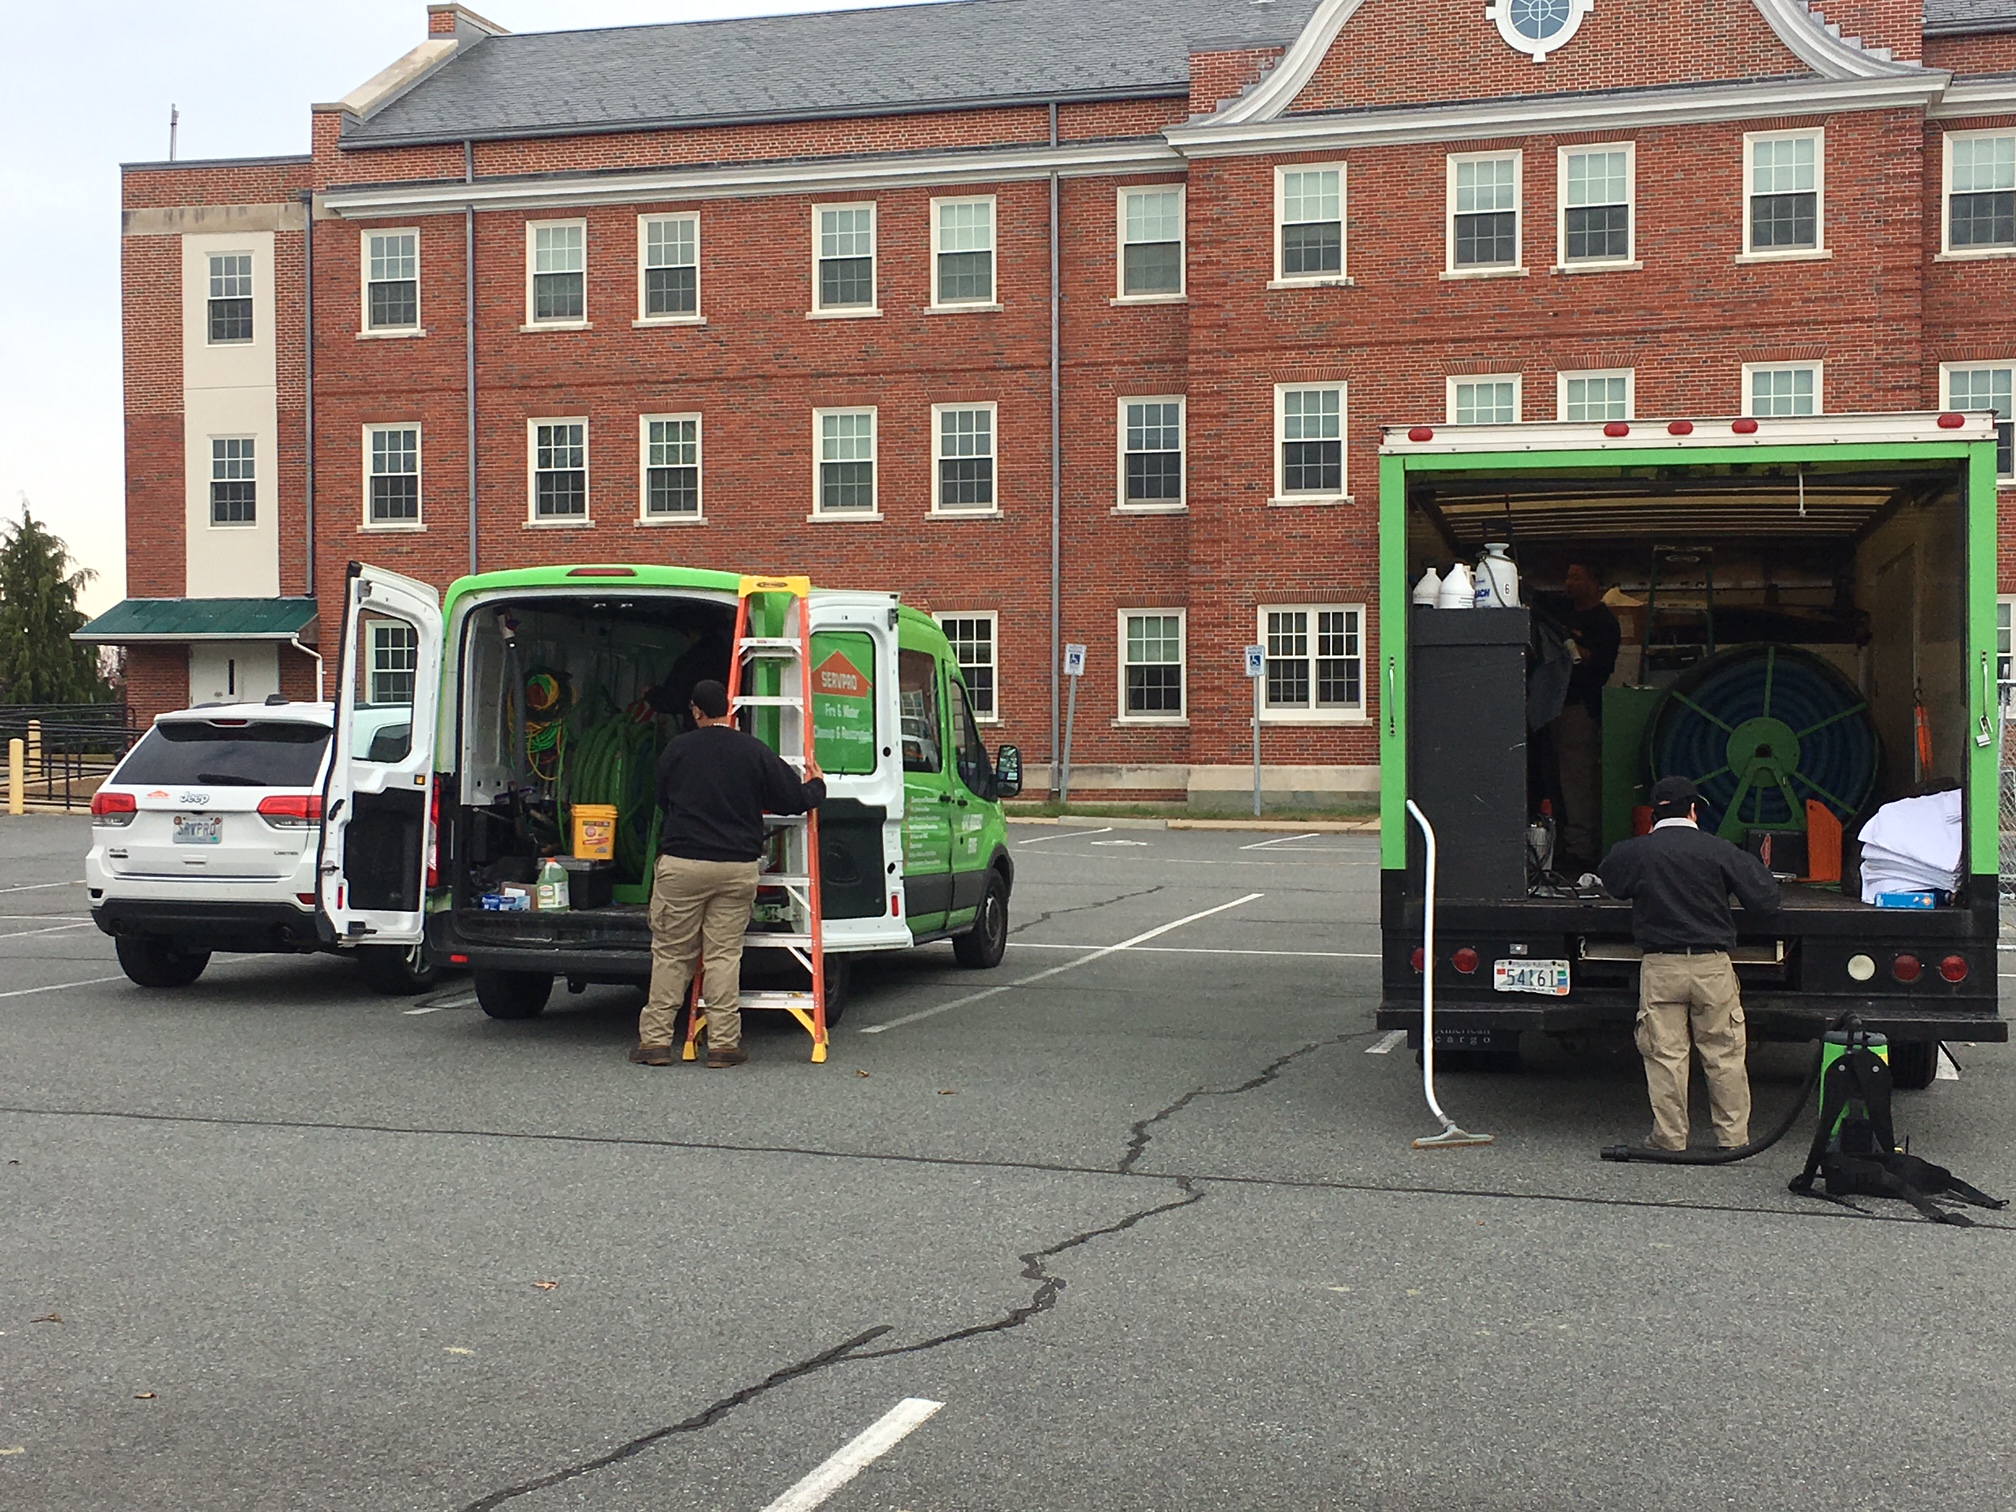 Getting ready for a busy day! #SERVPRO